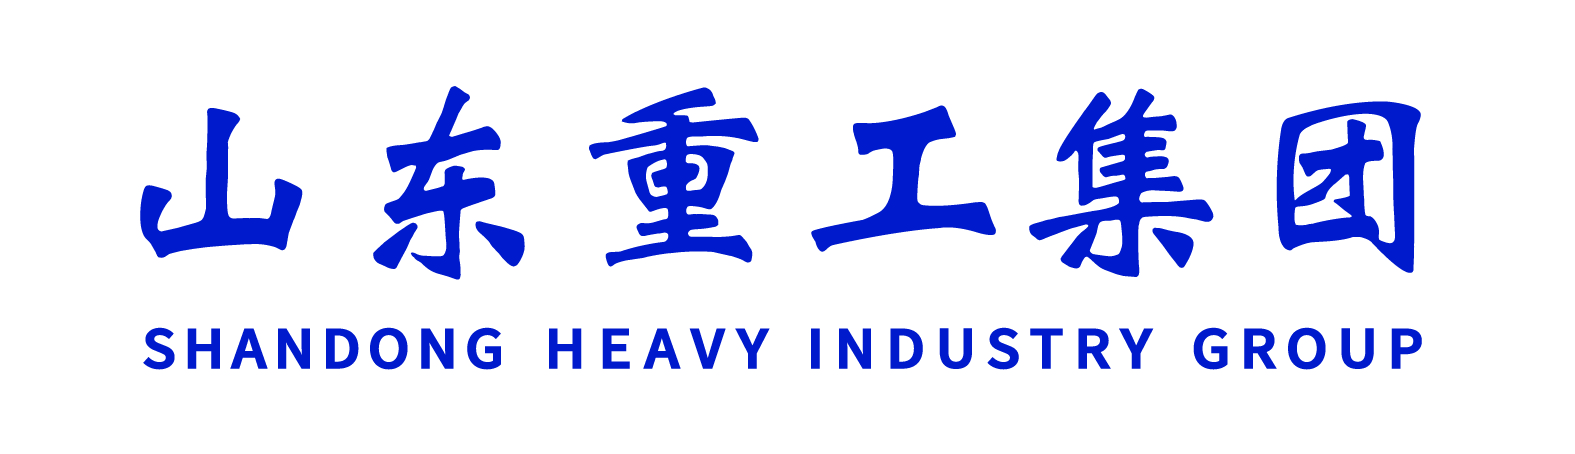 shandong heavy industry group